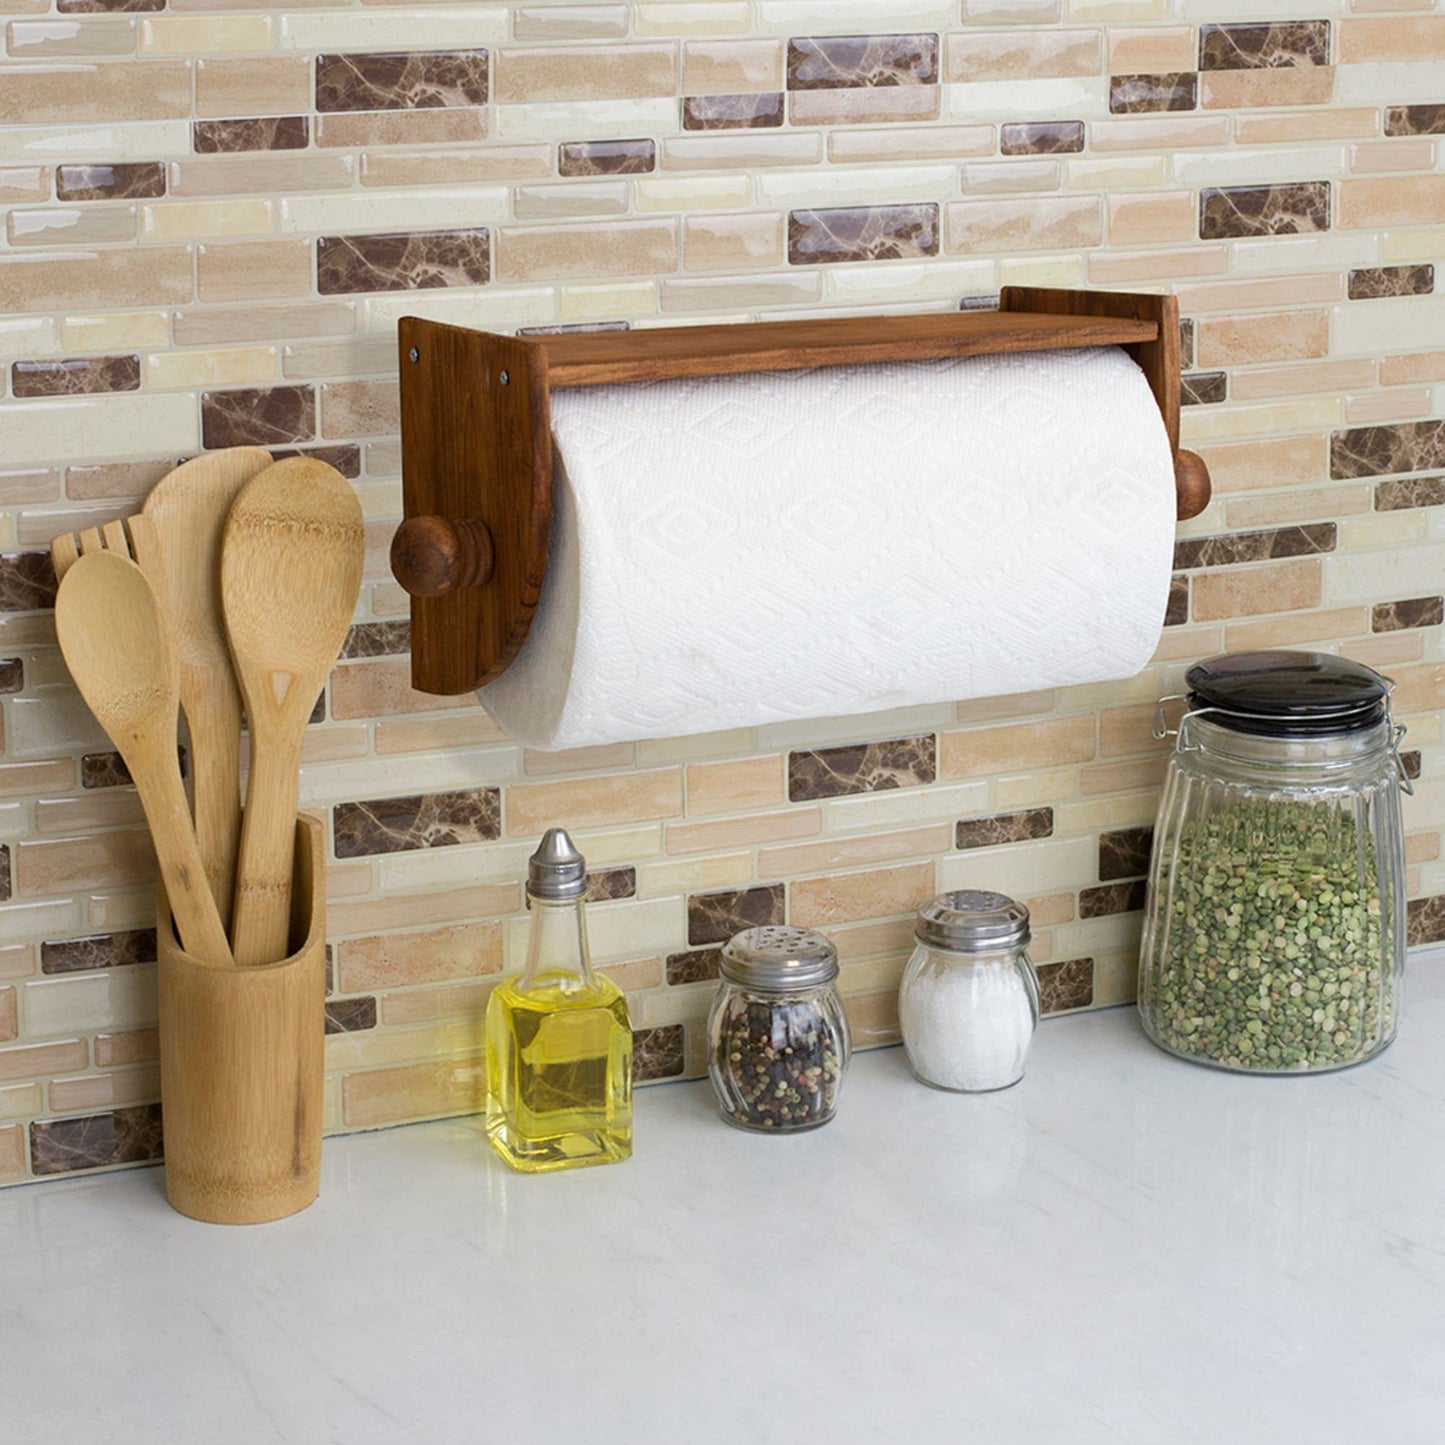 Quick Install Rustic Pine Wood Wall Mounted Paper Towel Holder